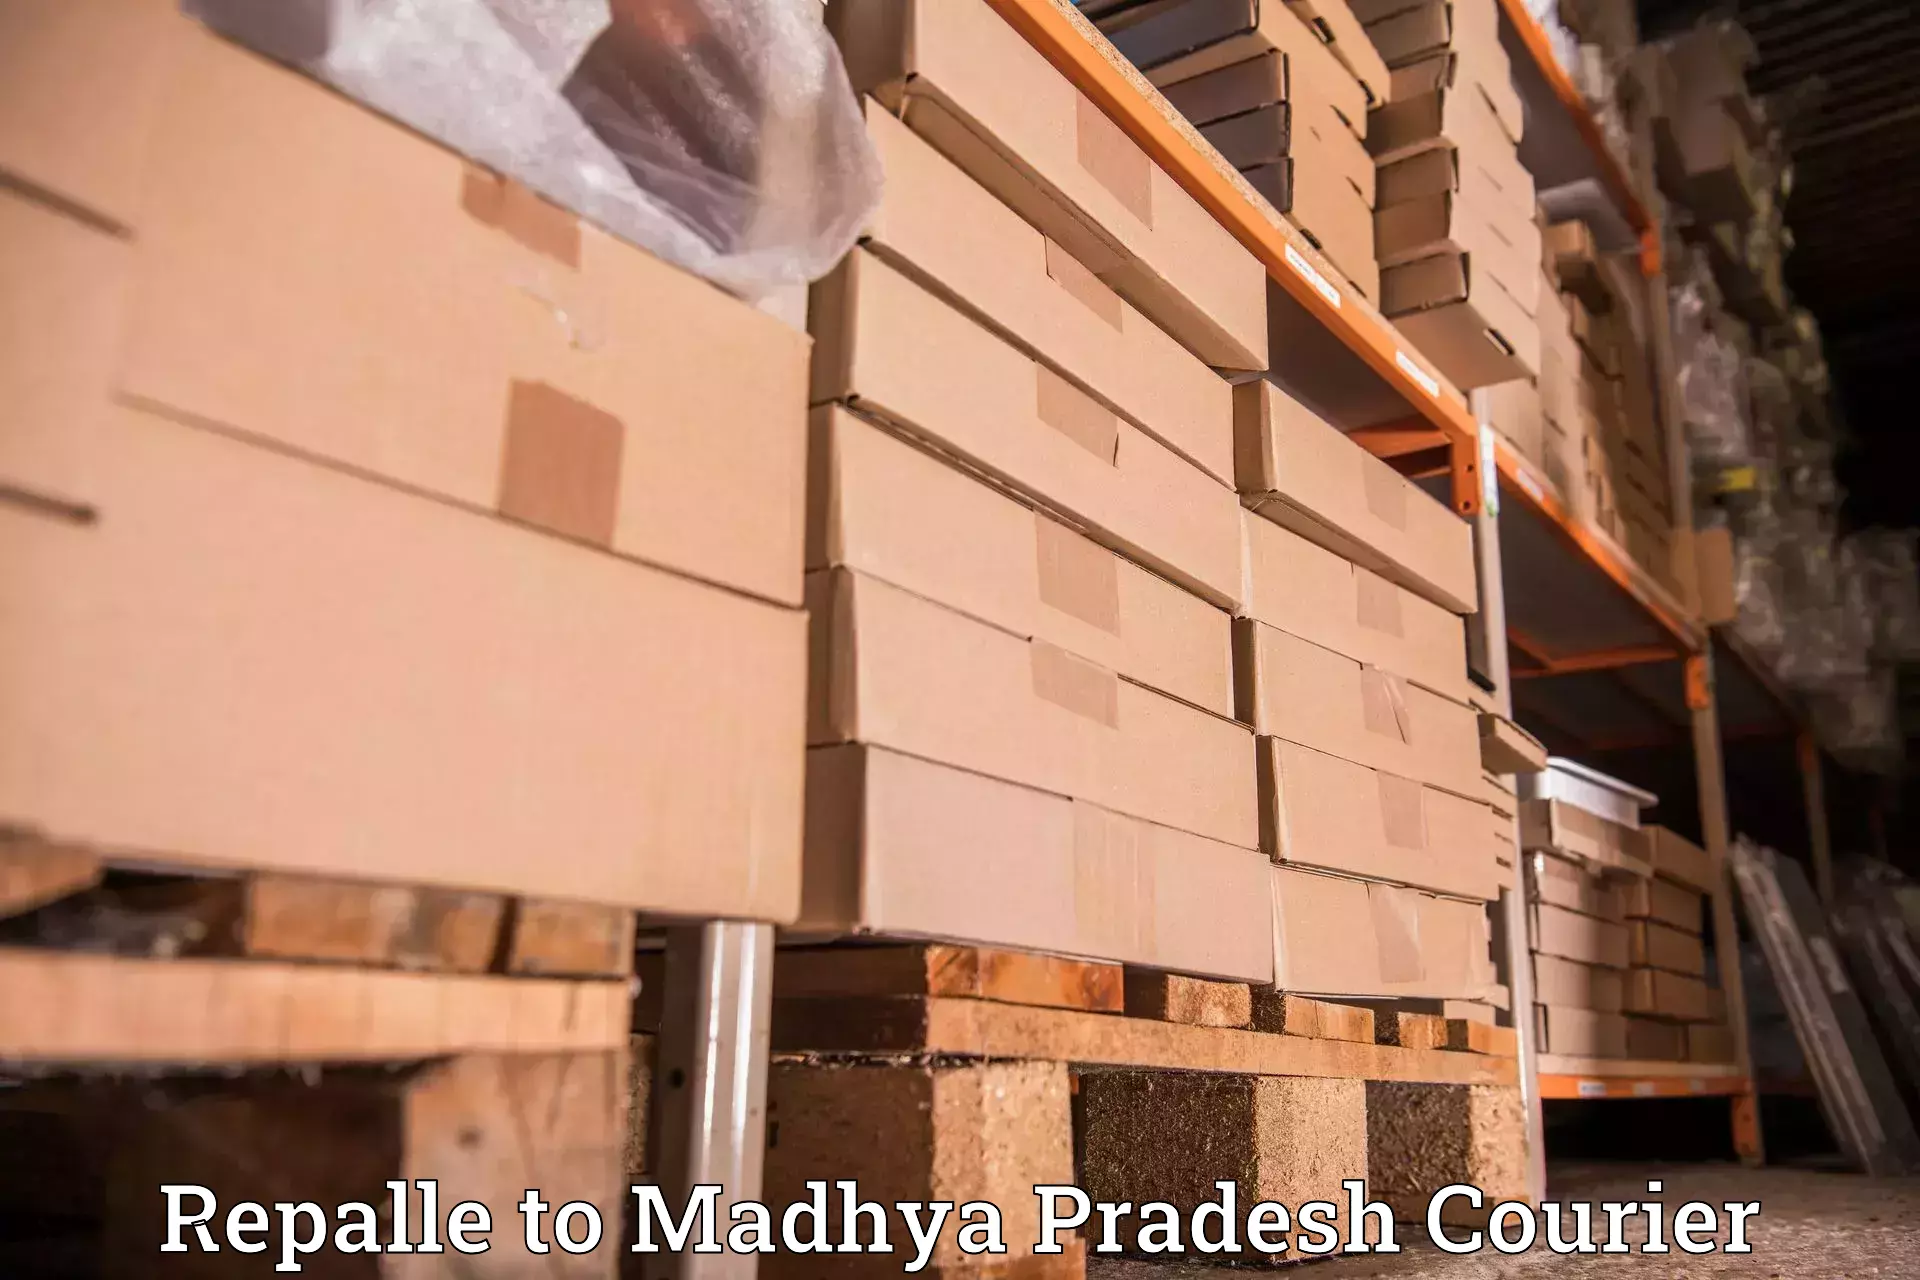 Express mail solutions Repalle to Madhya Pradesh